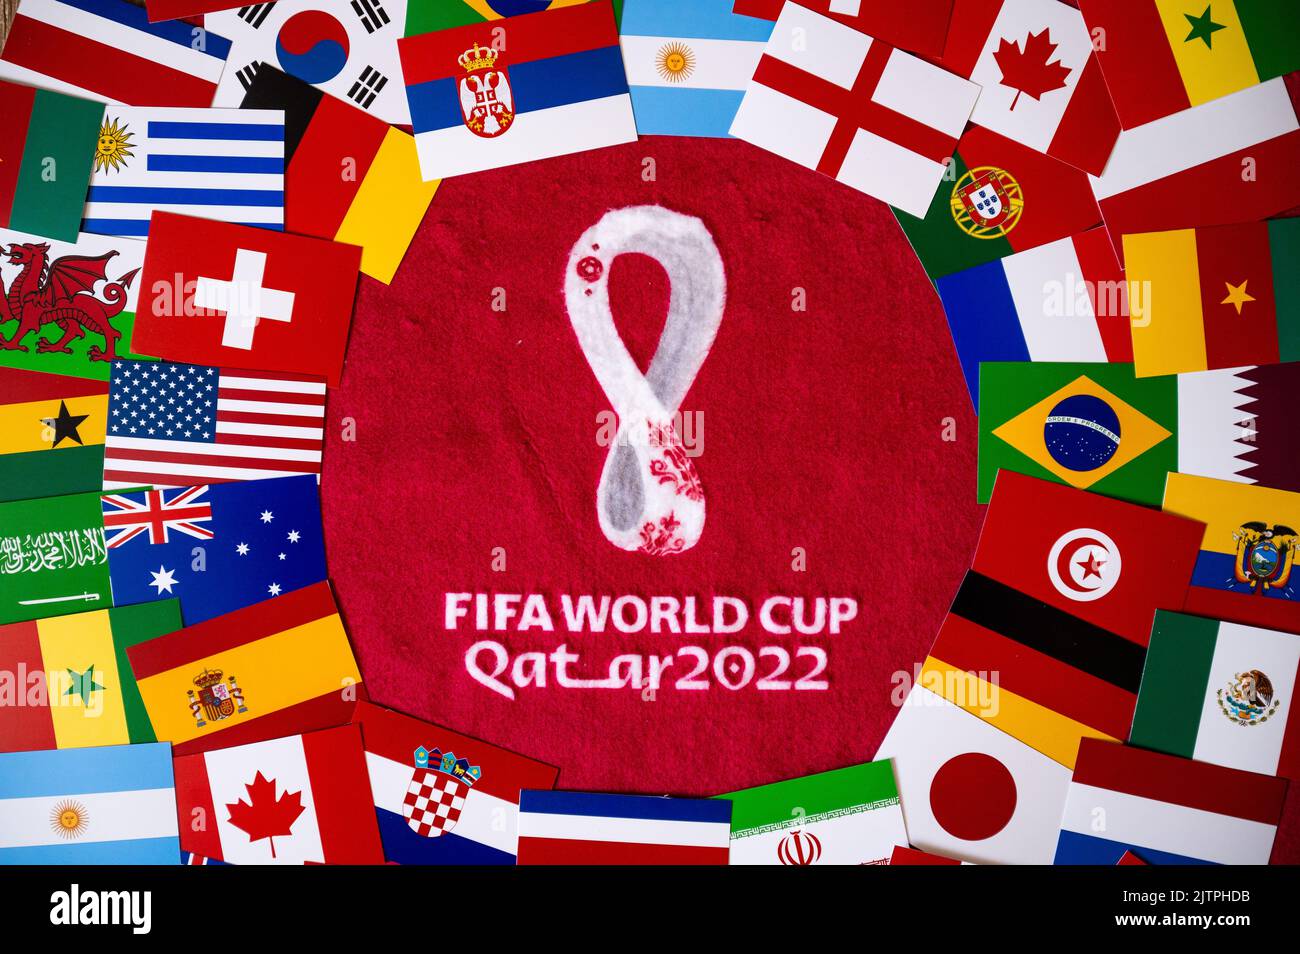 Doha Qatar August 30 2022 Flags Of All 32 Teams Participating On